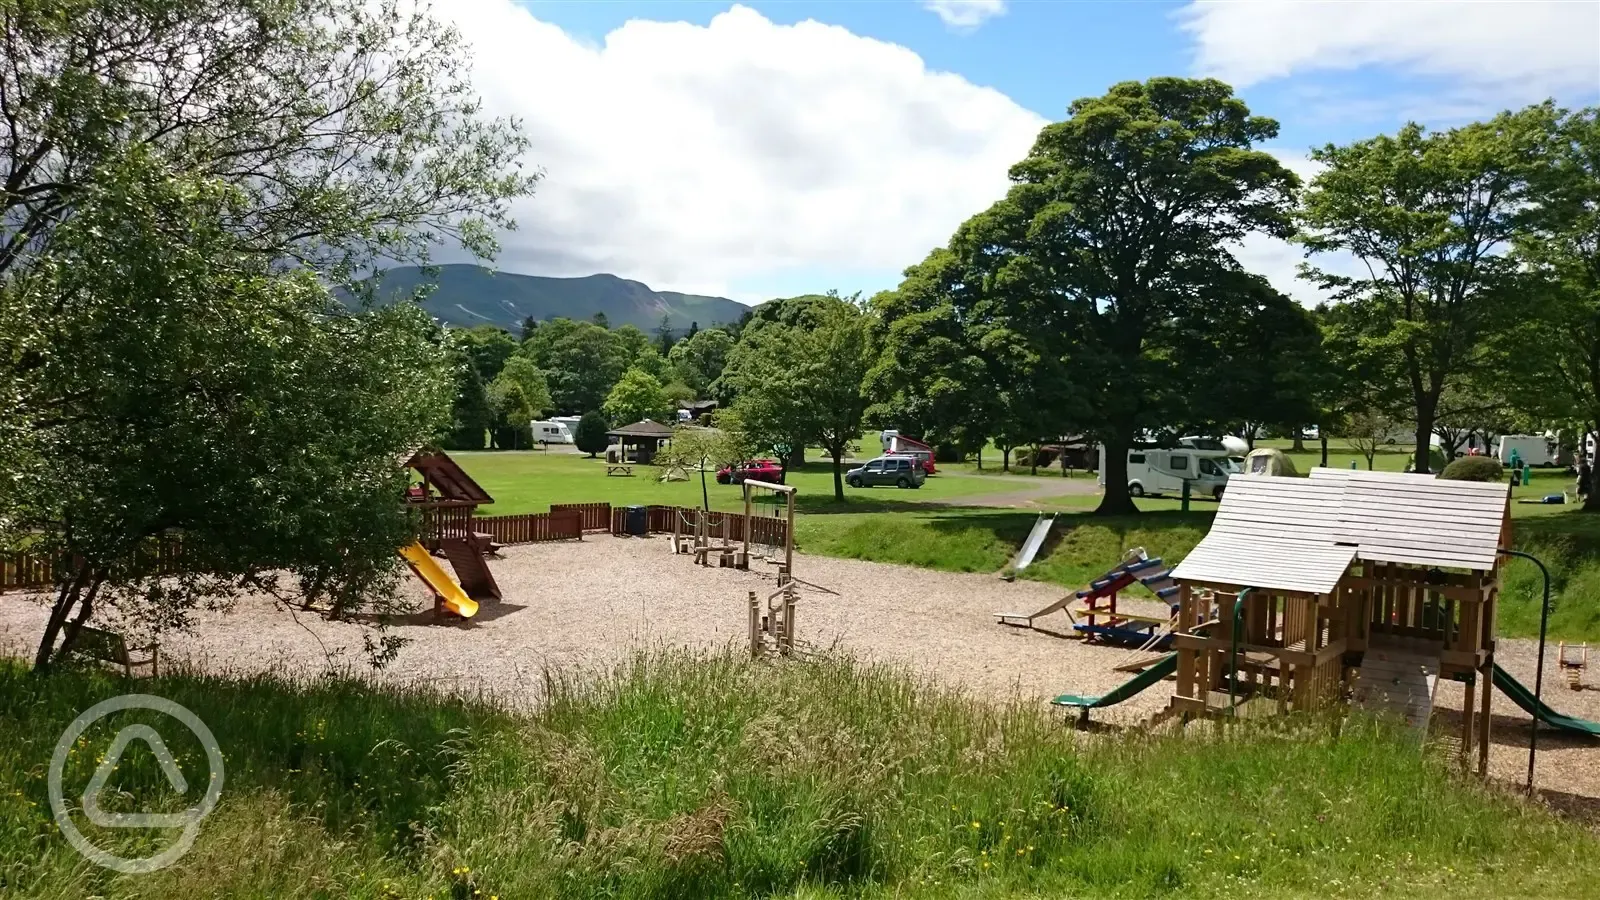 View over play area towards the Pentland Hills